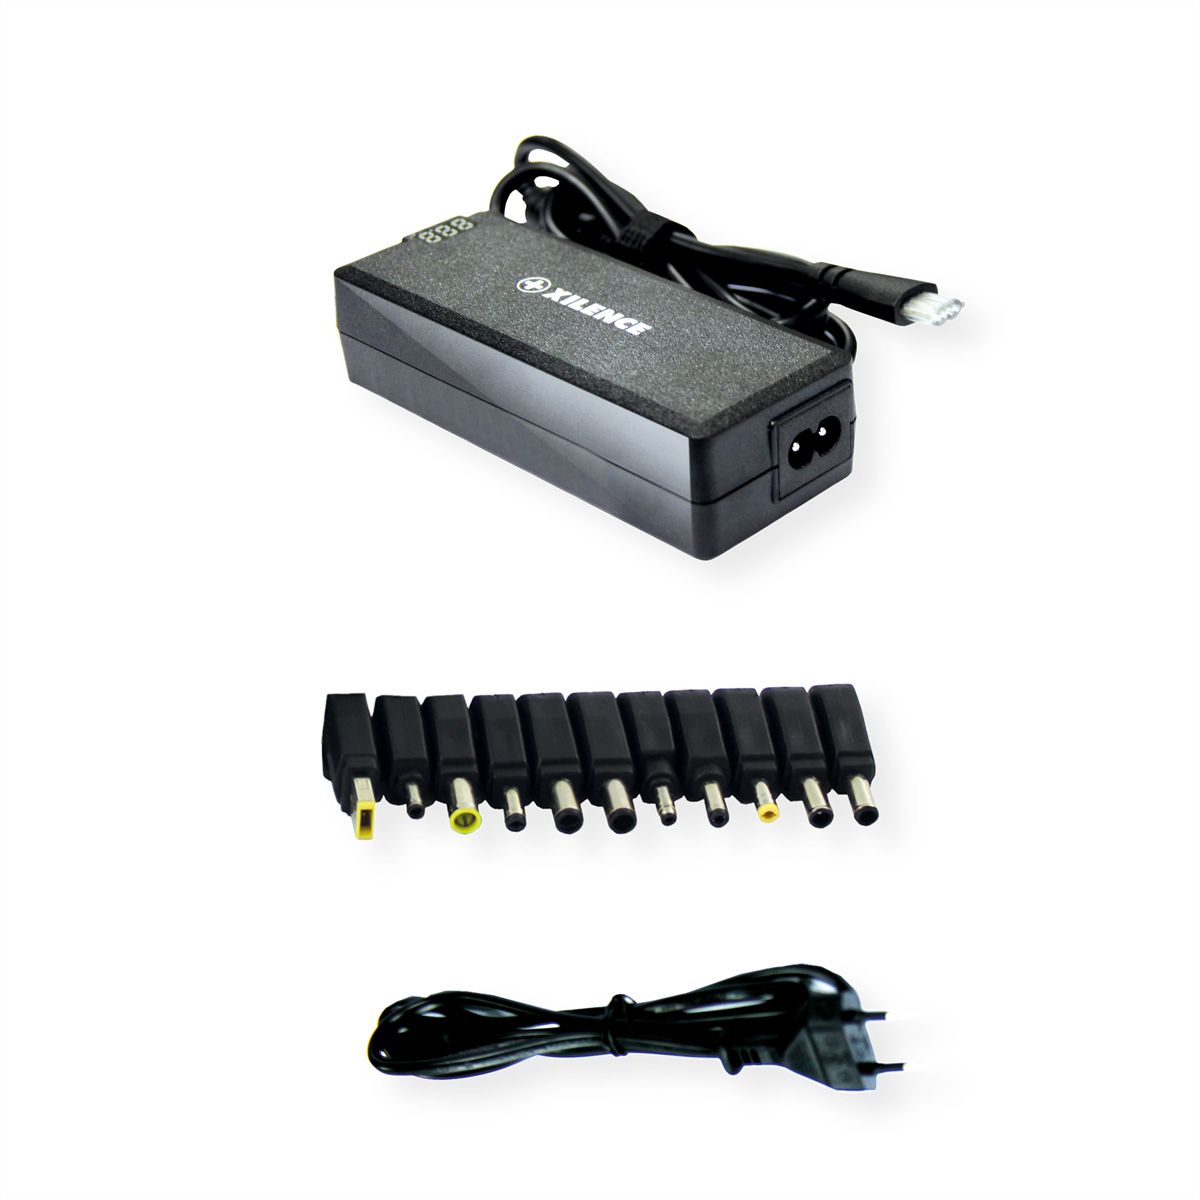 Xilence XM012 Universal Notebook Ladegerät, 11 Adapter, LED Anzeige, 120W -  SECOMP Electronic Components GmbH